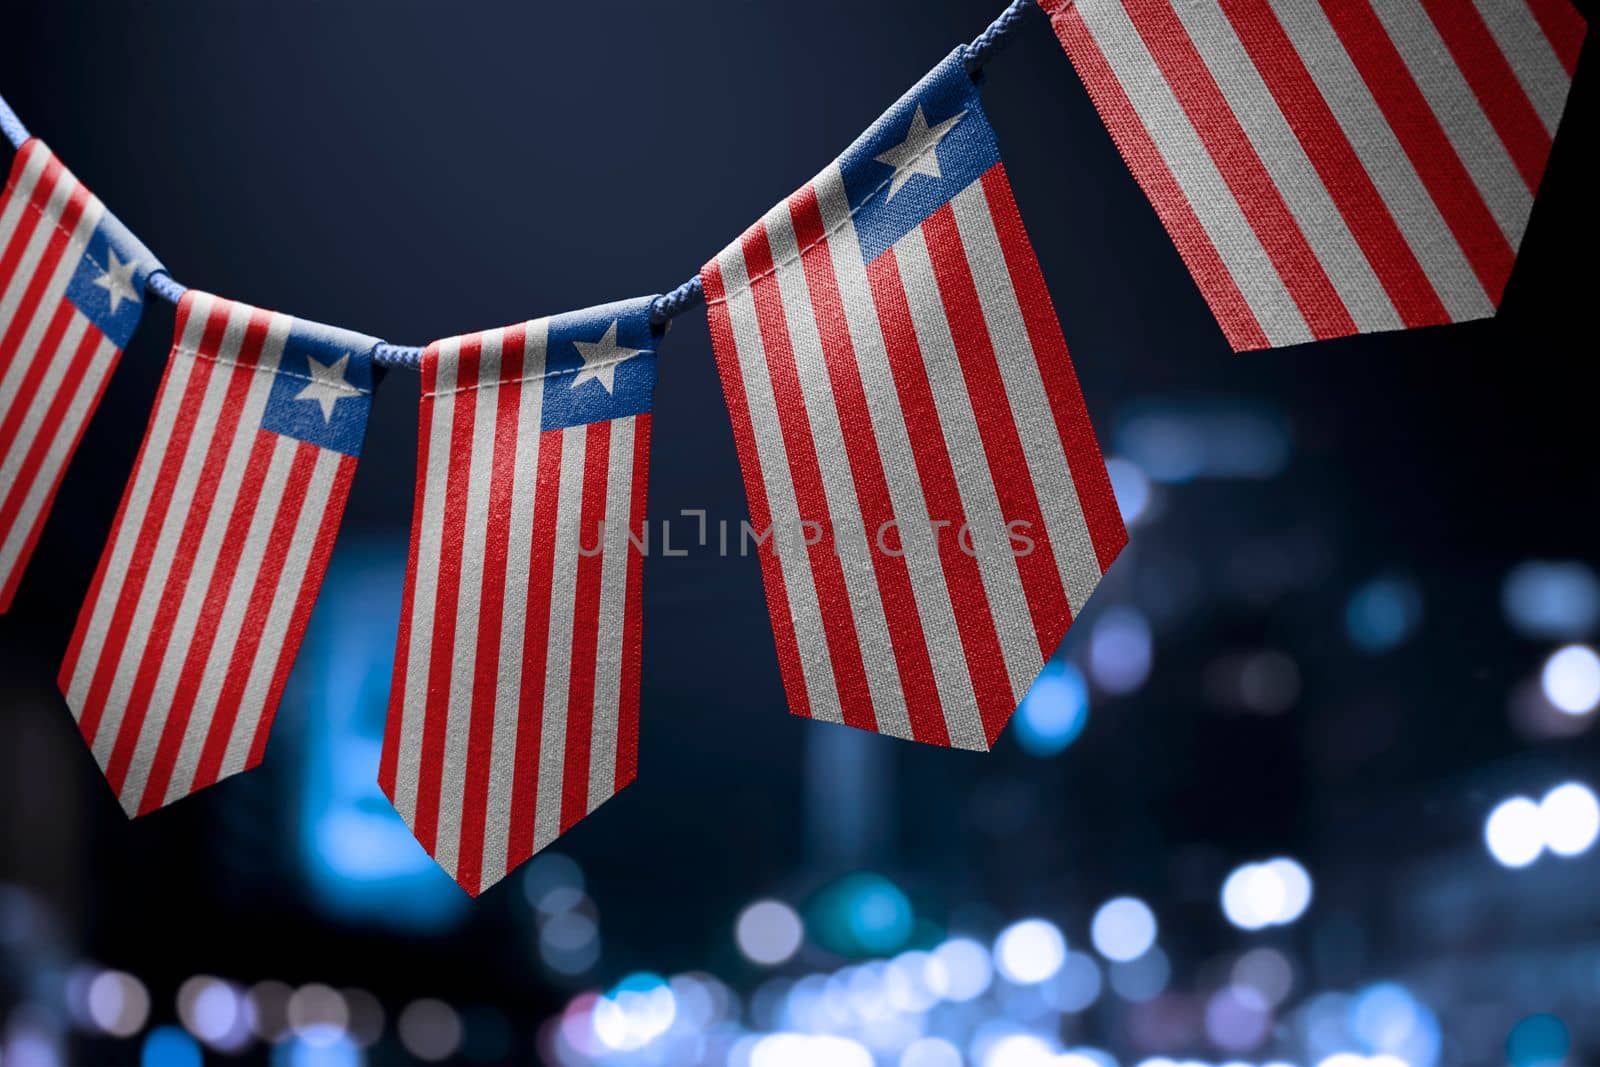 A garland of Liberia national flags on an abstract blurred background.